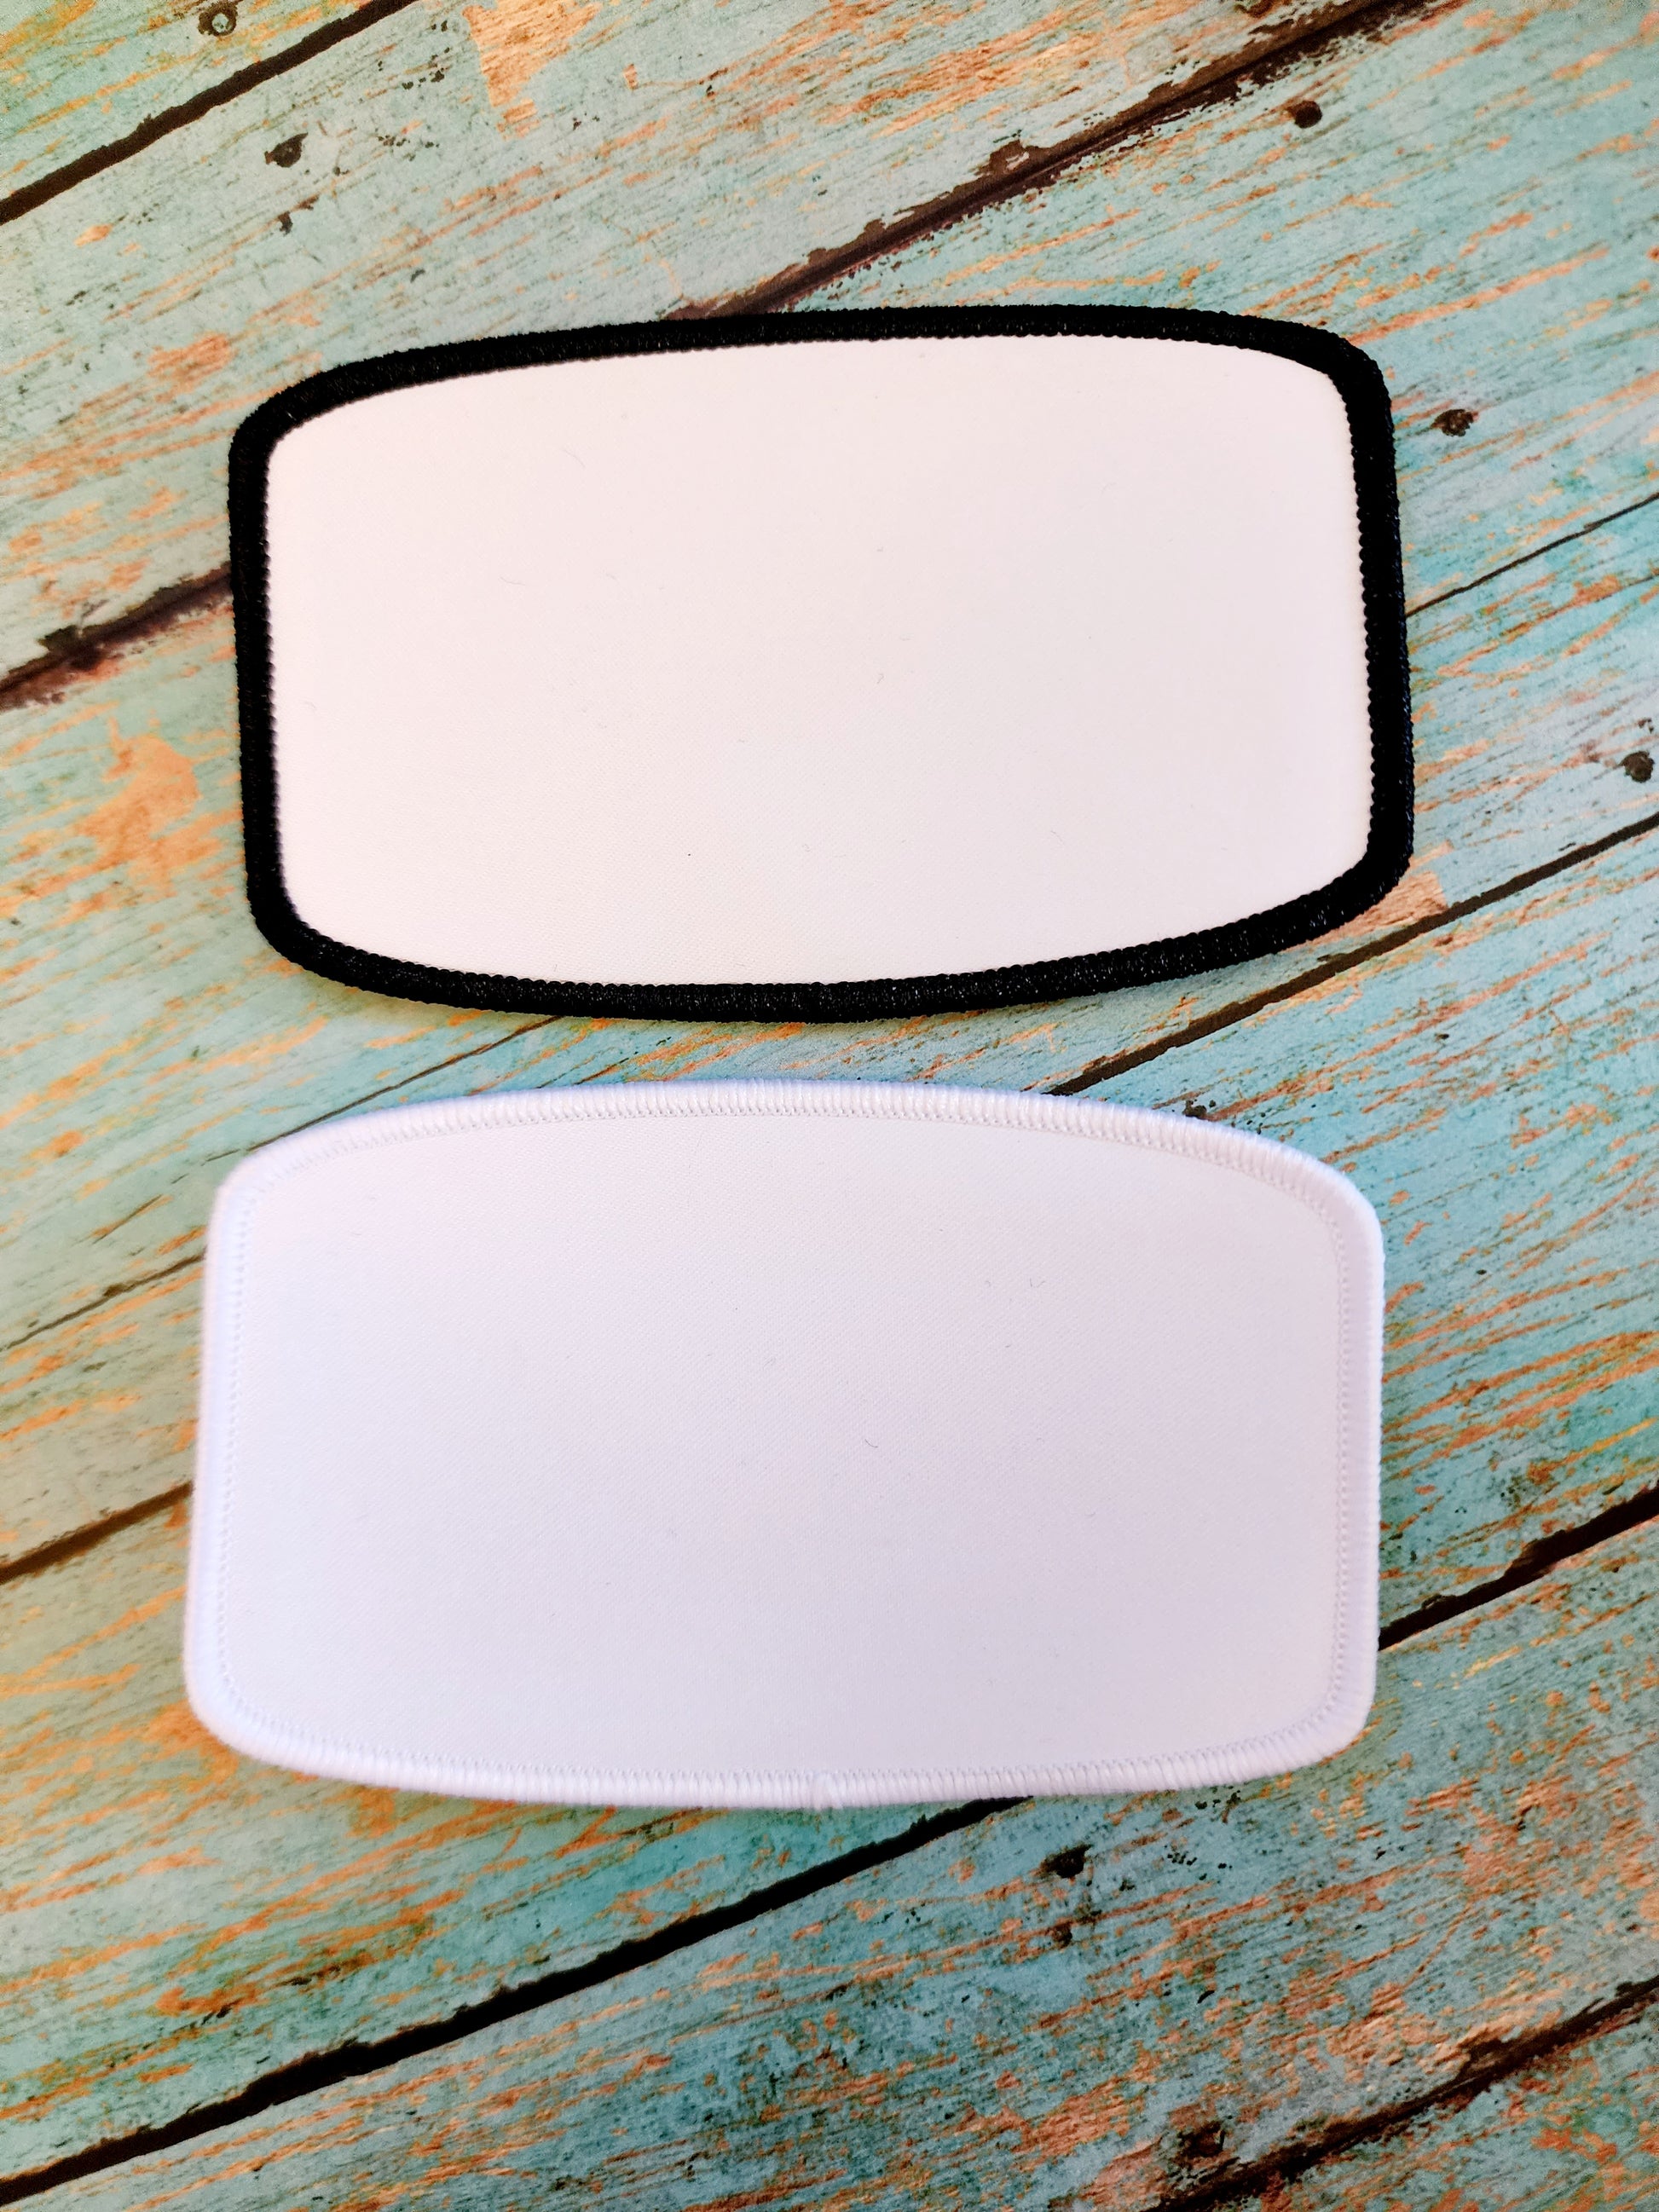 Round Hat Patch Sublimation Blank with Merrow White or Black Trim